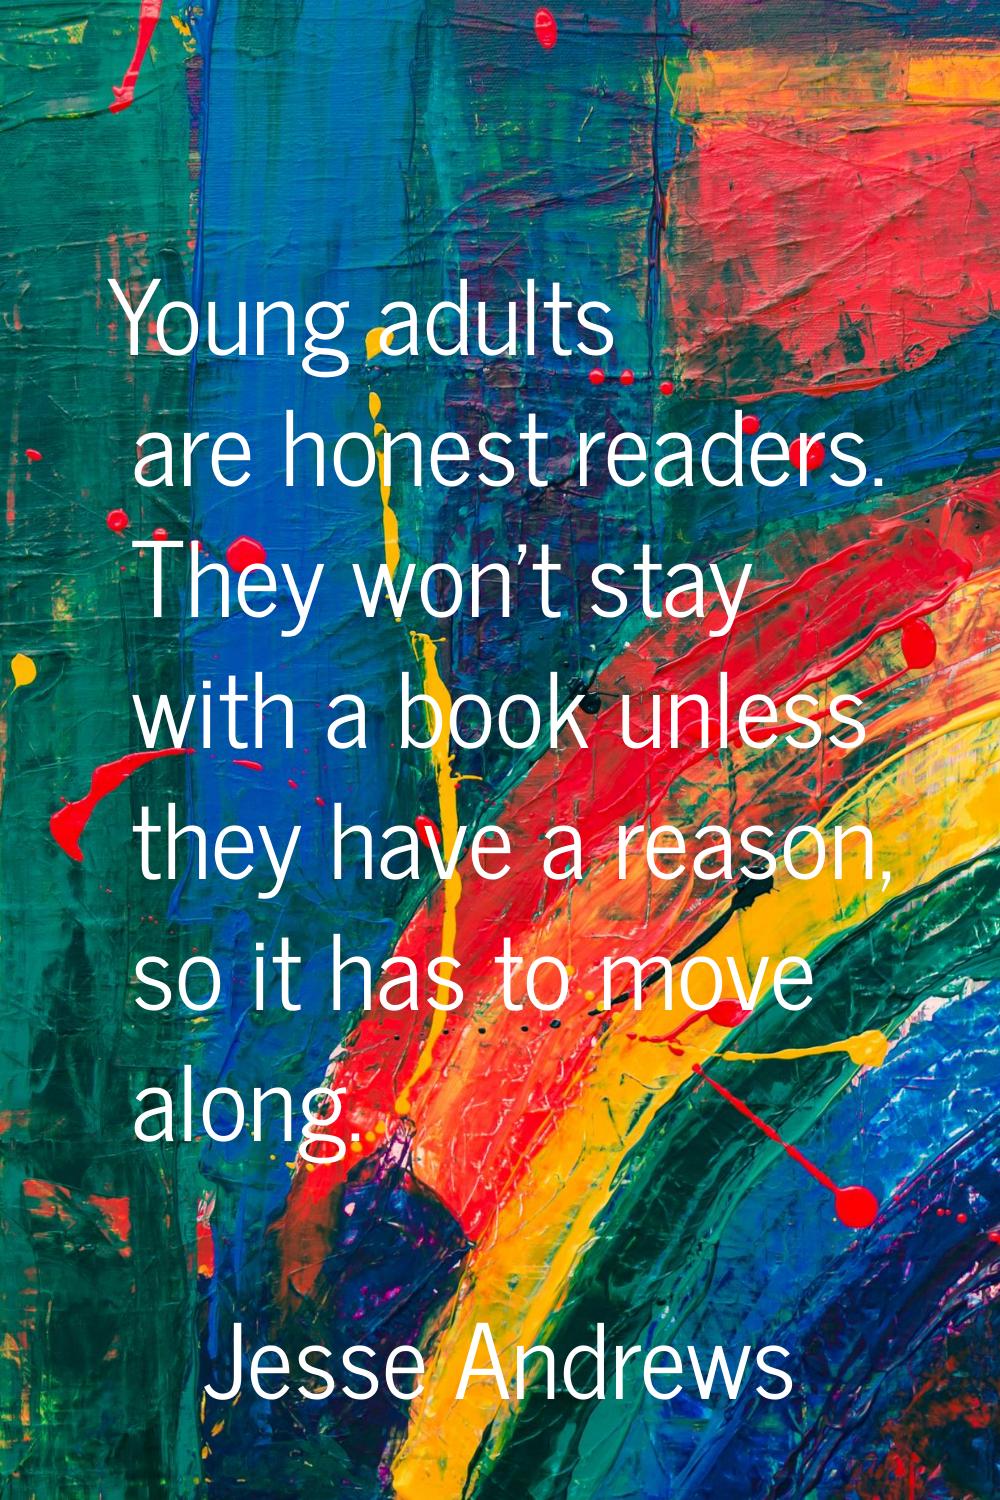 Young adults are honest readers. They won't stay with a book unless they have a reason, so it has t